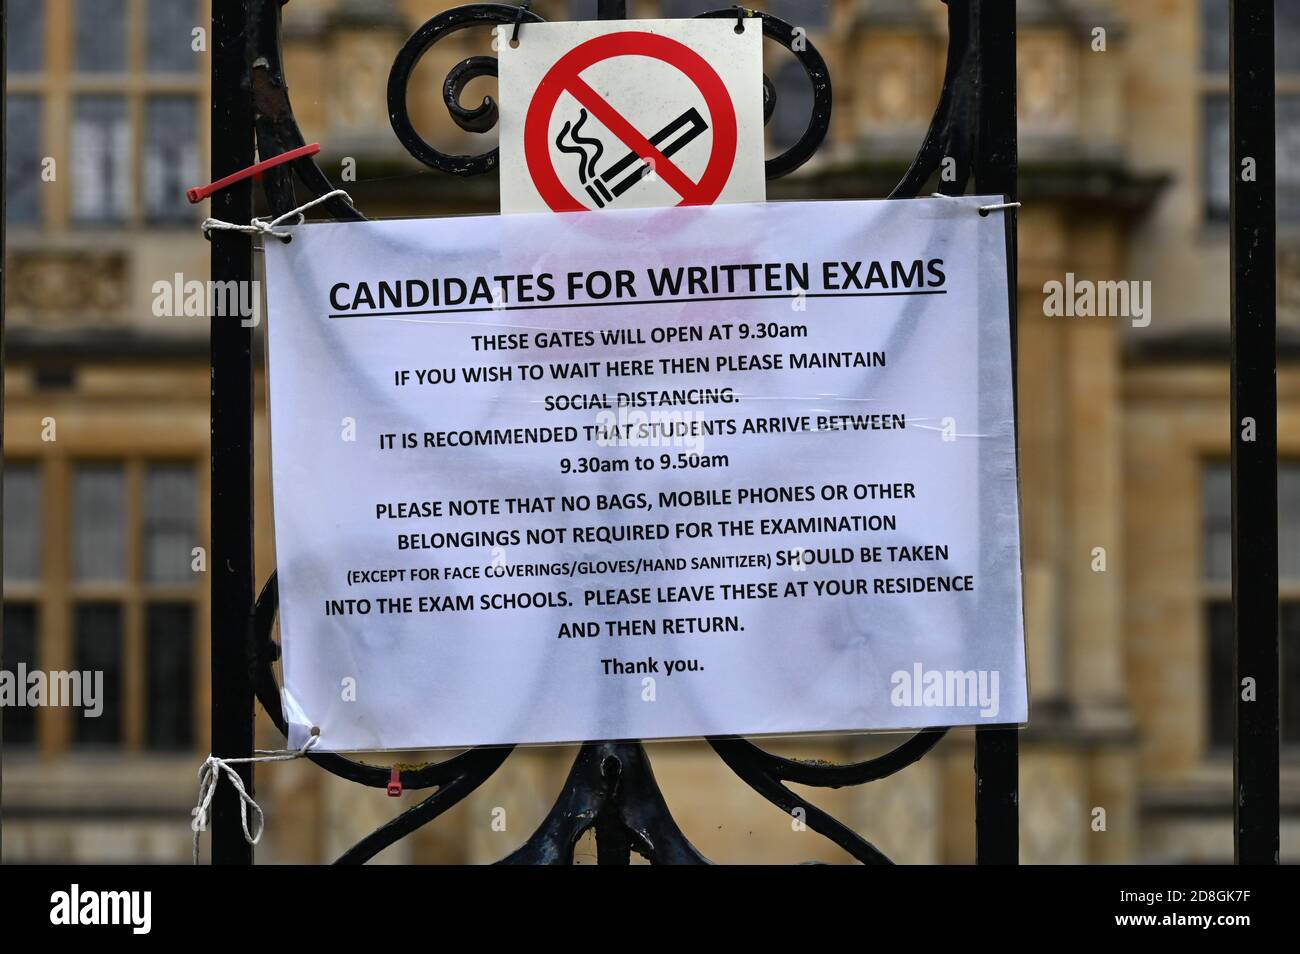 Guidance notice for candidates for written examinations fastenend to gates of Examination schools, Merton Street, Oxford in light of the Covid-19 pand Stock Photo